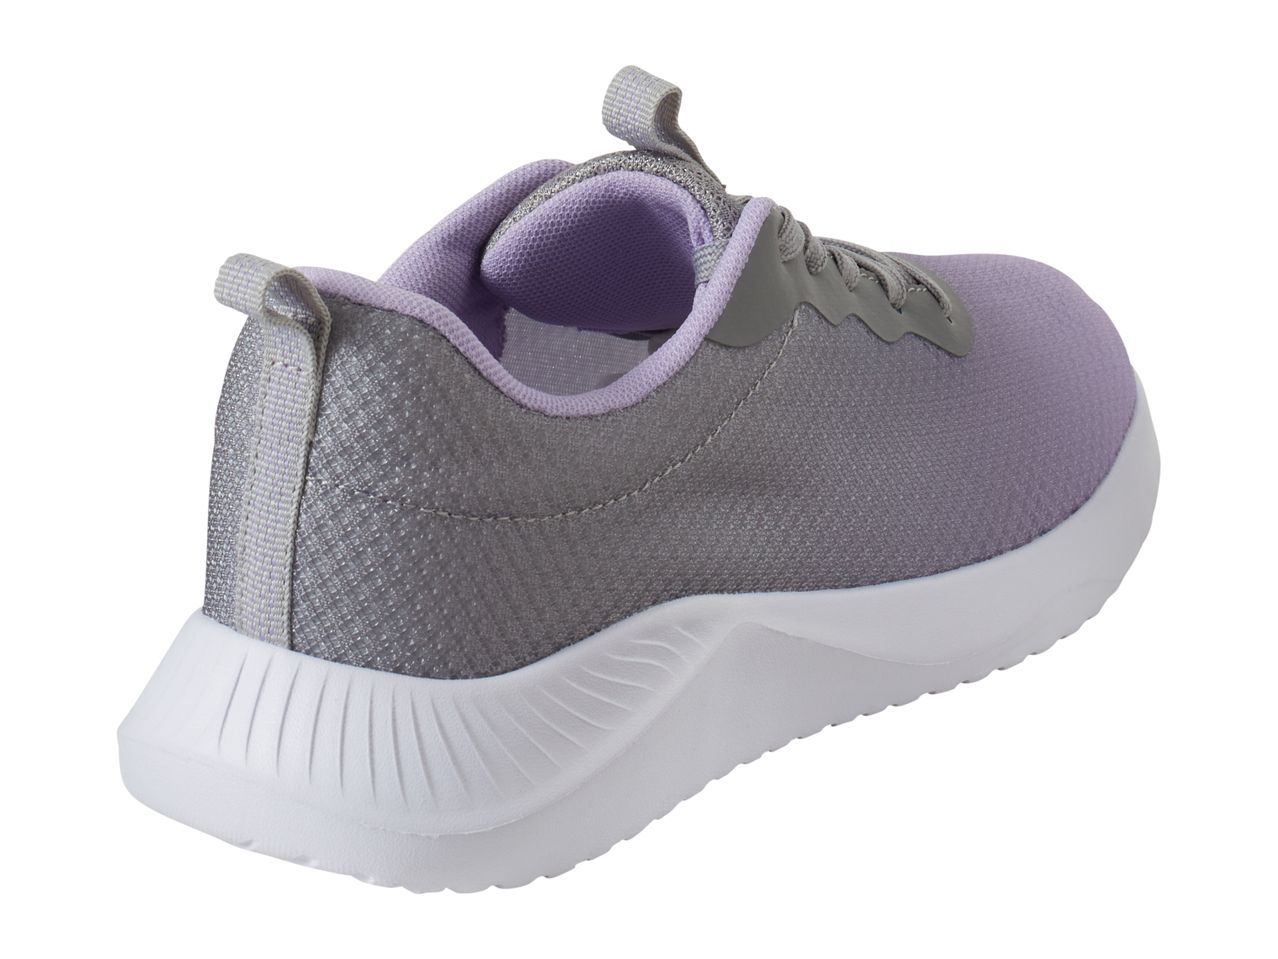 Go to full screen view: Crivit Ladies' Trainers - Image 7